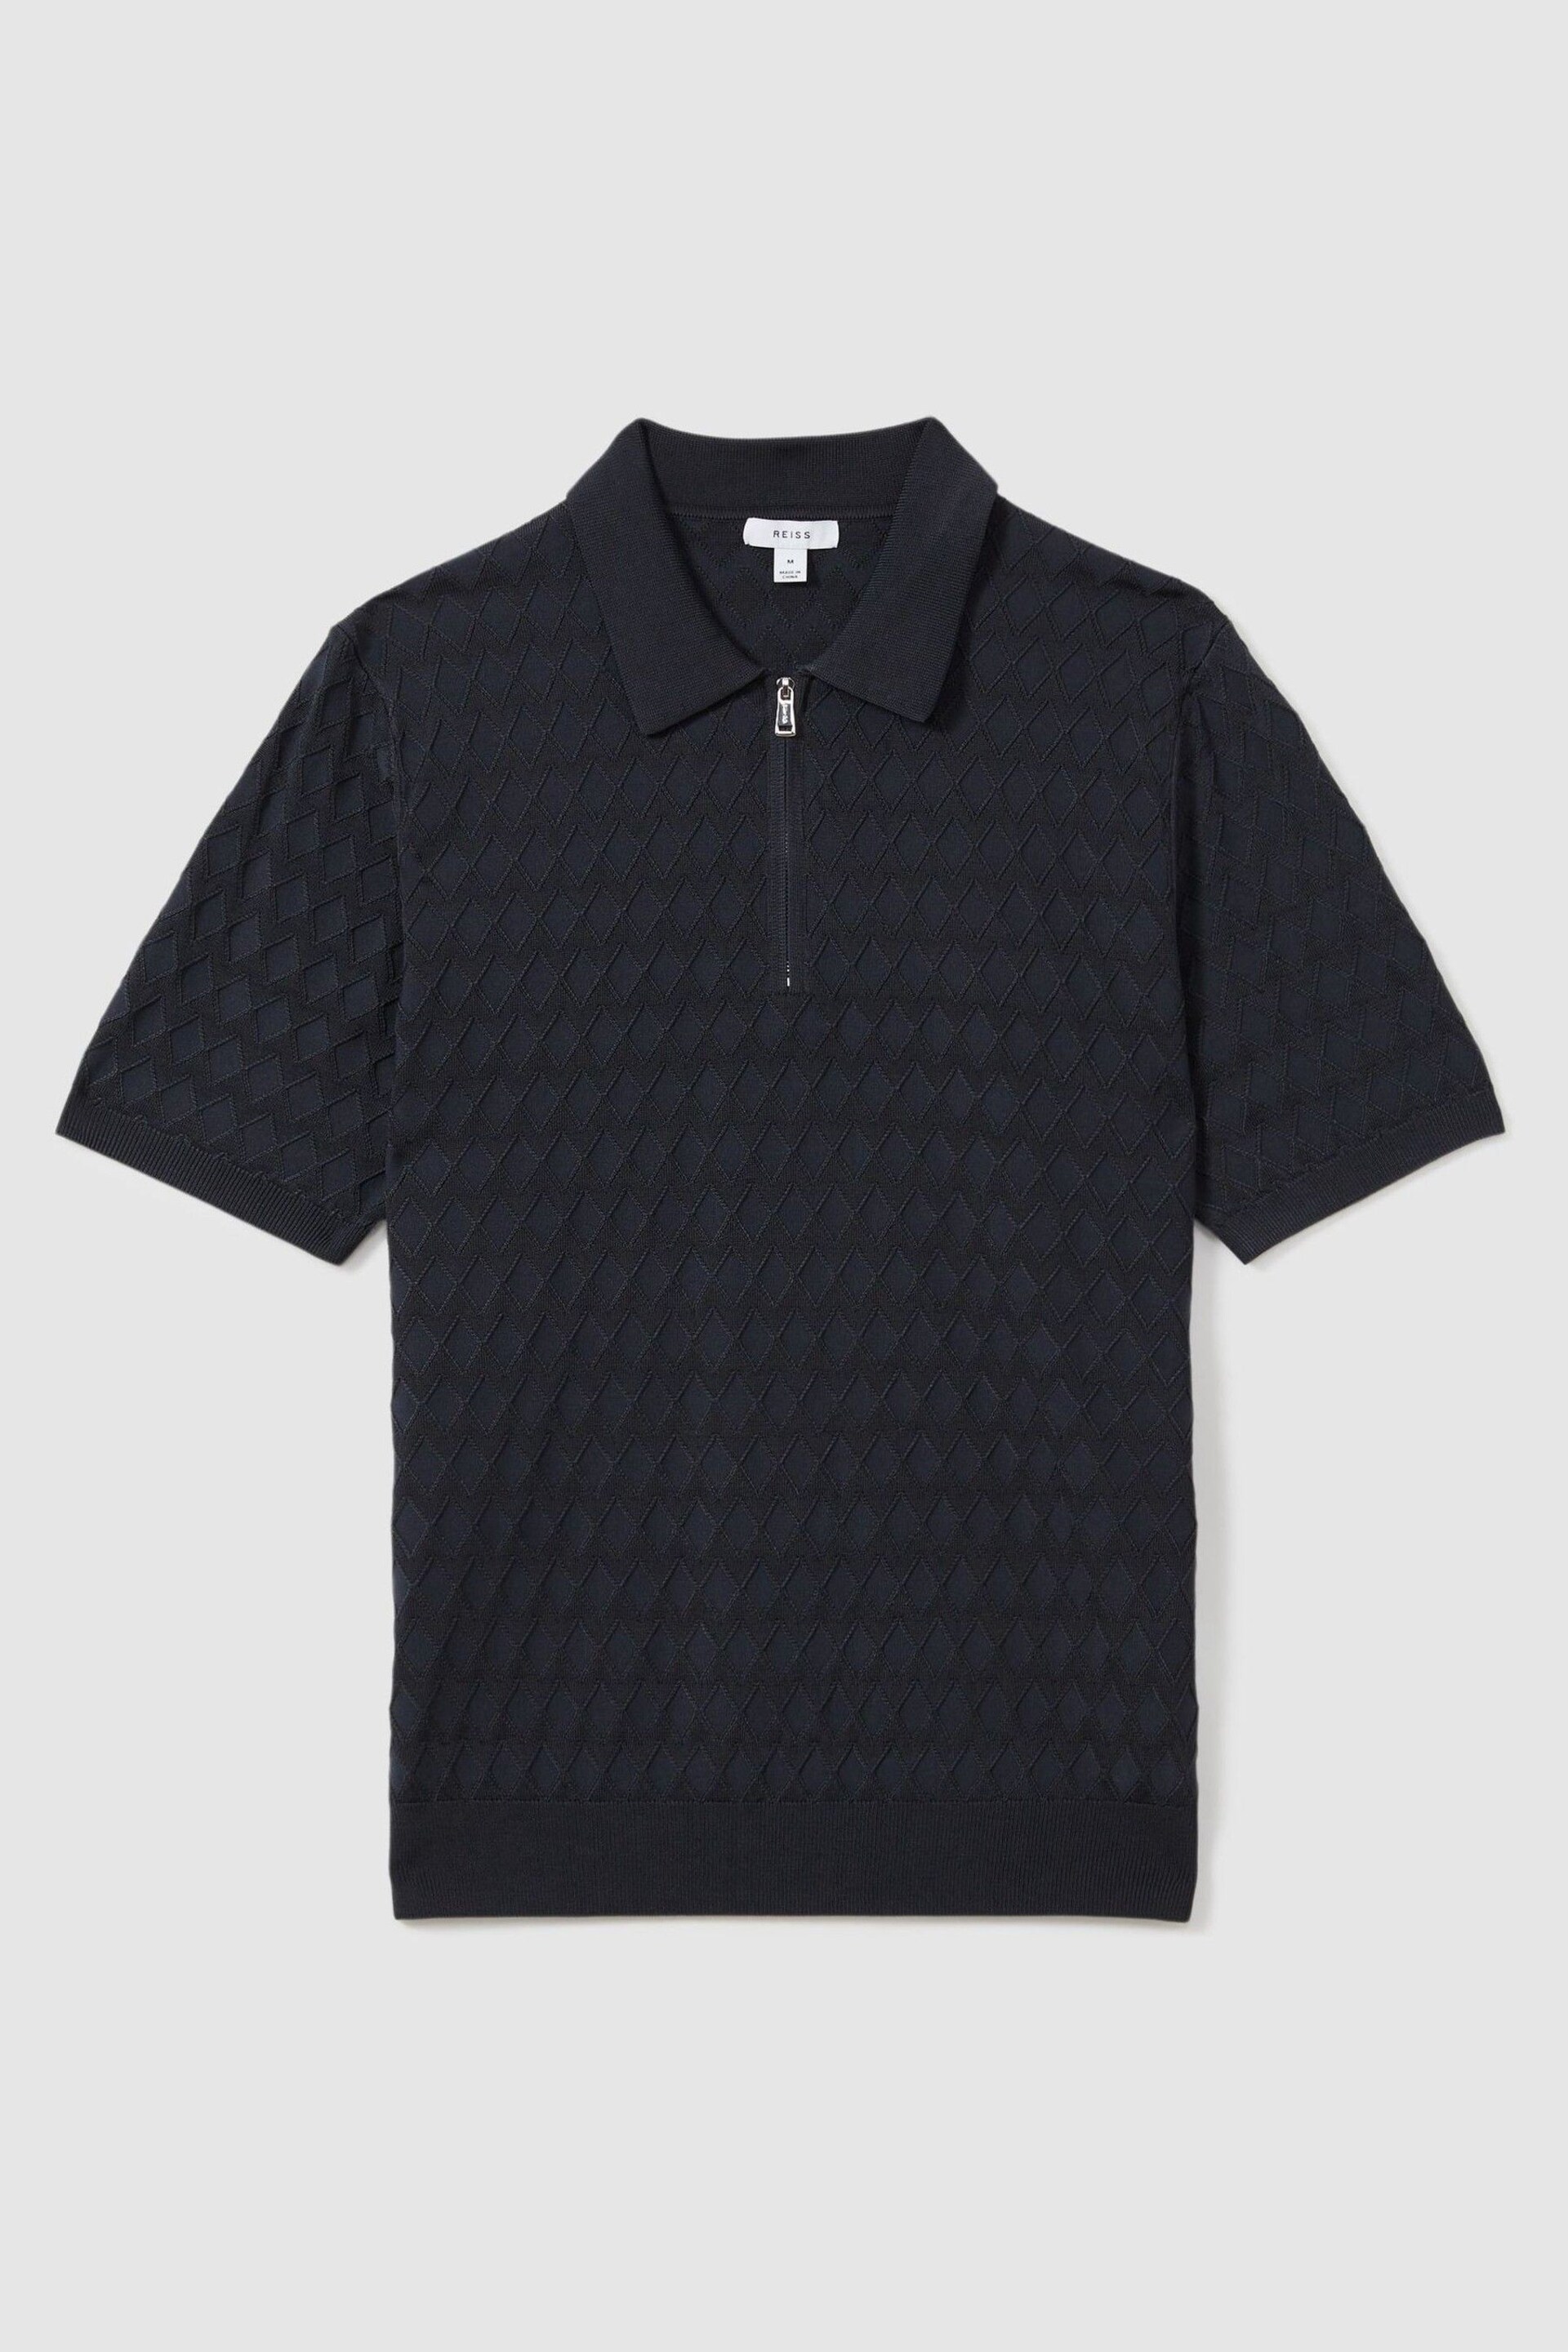 Reiss Navy Rizzo Half-Zip Knitted Polo Shirt - Image 2 of 6